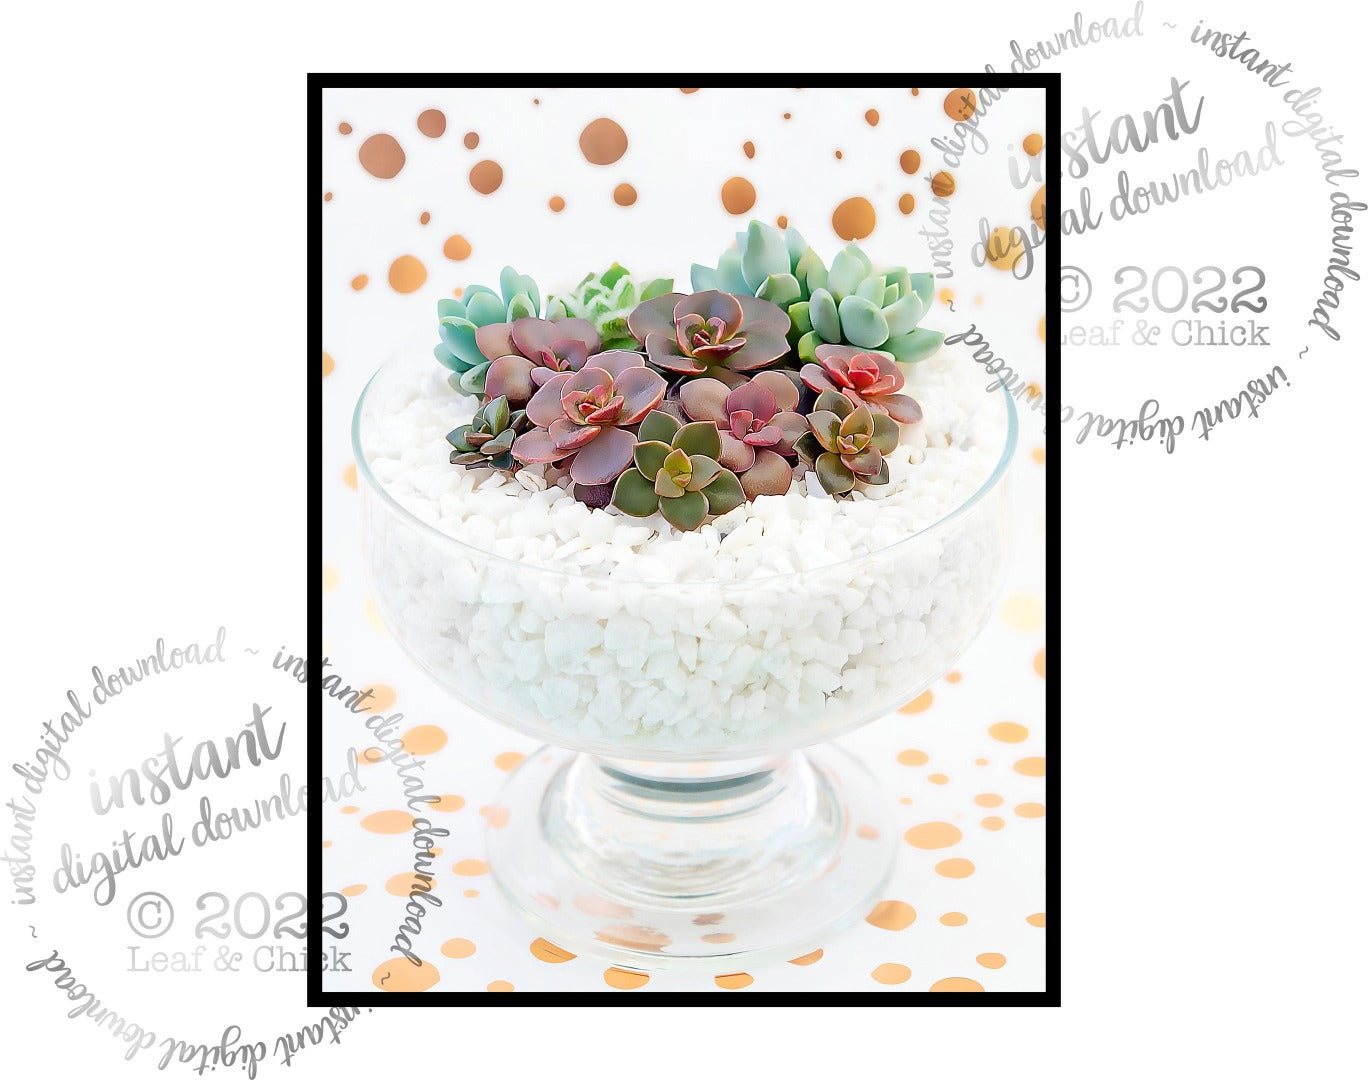 bowl of white pebbles with succulent art